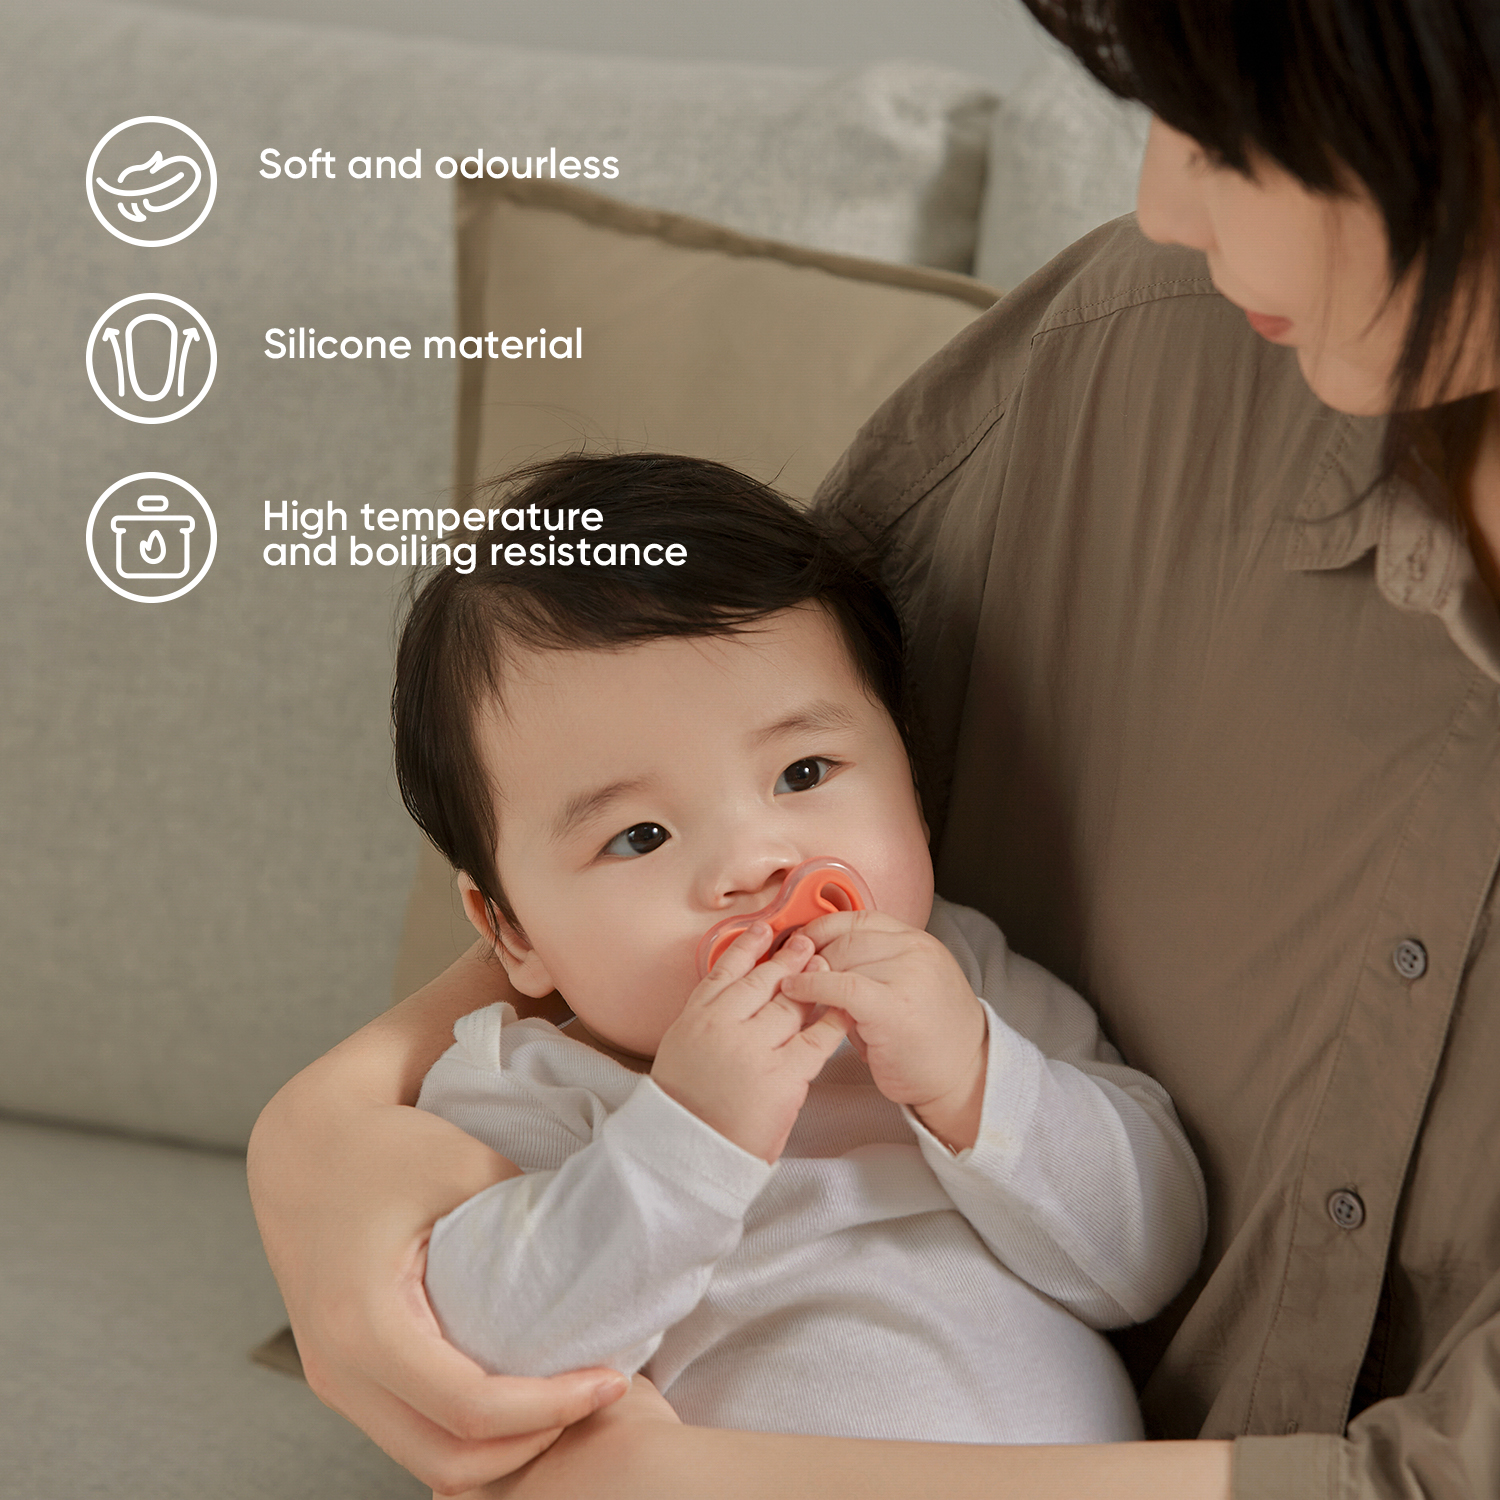 The tips when using silicone soother